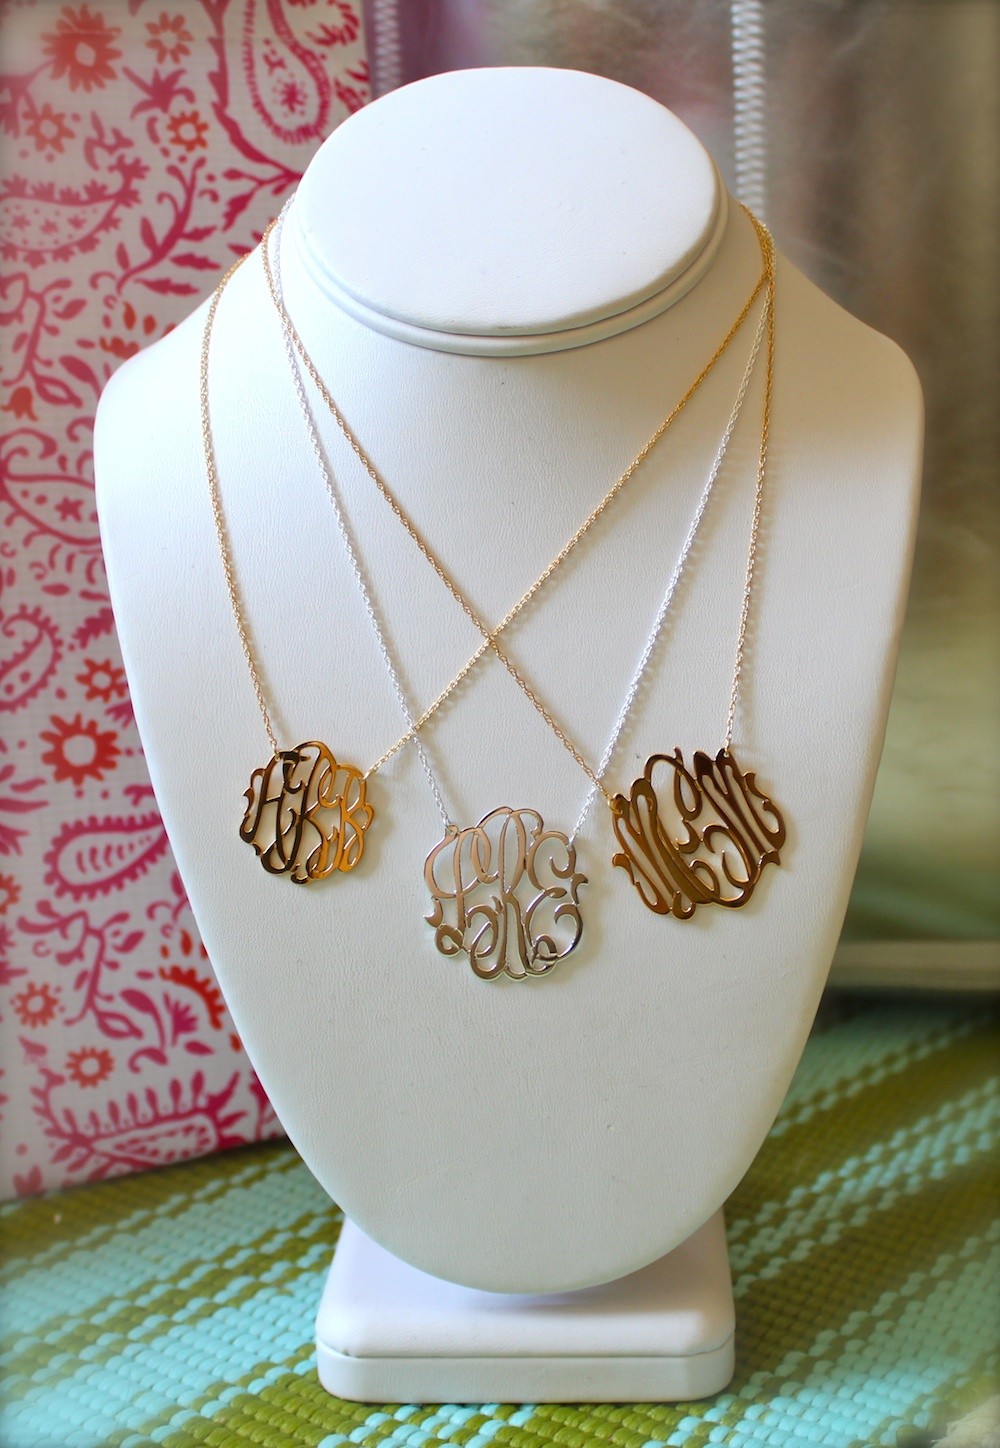 Monogram Jewelry For The Bride And Bridesmaids - Rustic Wedding Chic